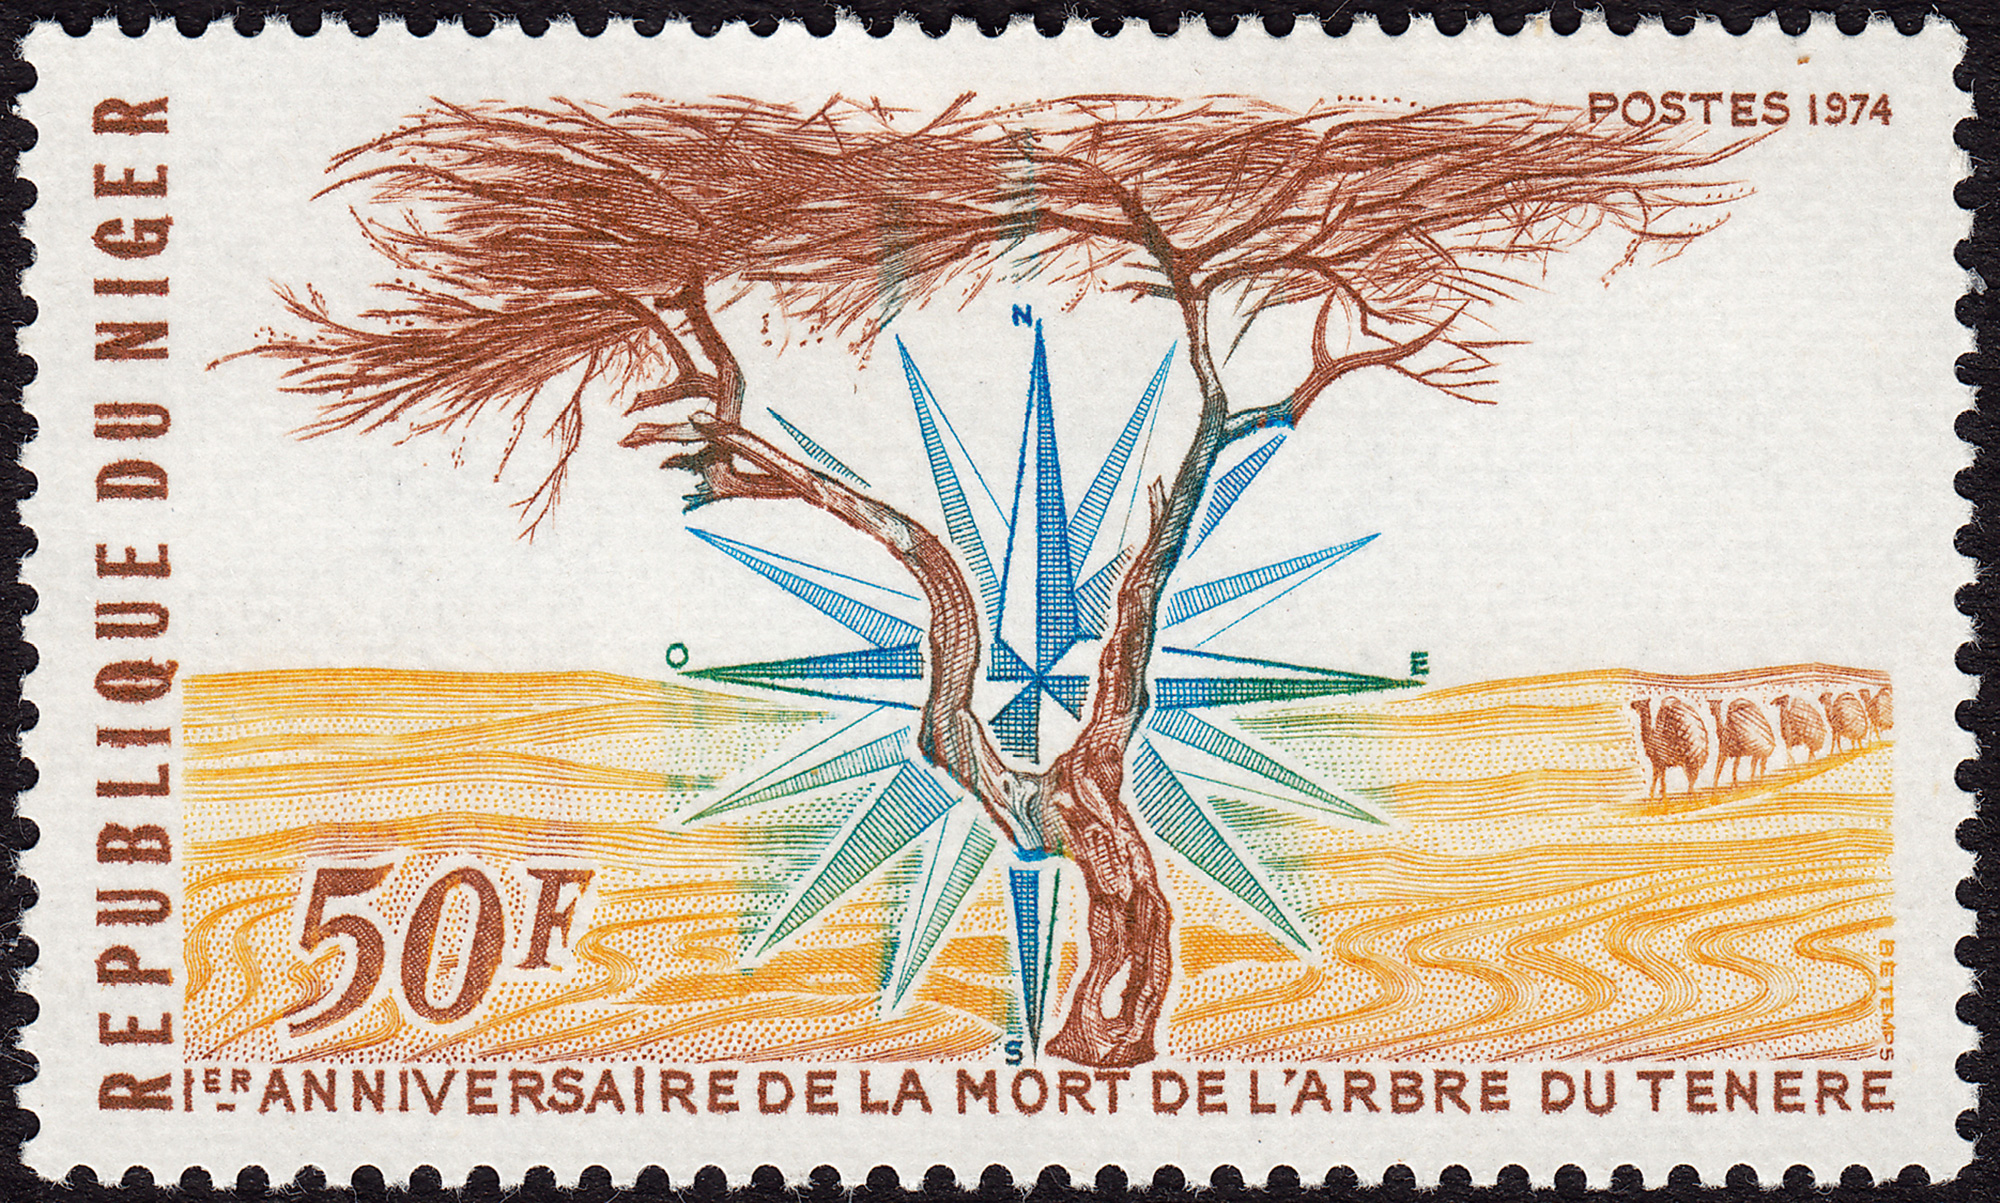 A Nigerien stamp issued in nineteen seventy-four commemorating the first anniversary of the death of the Tree of Ténéré.